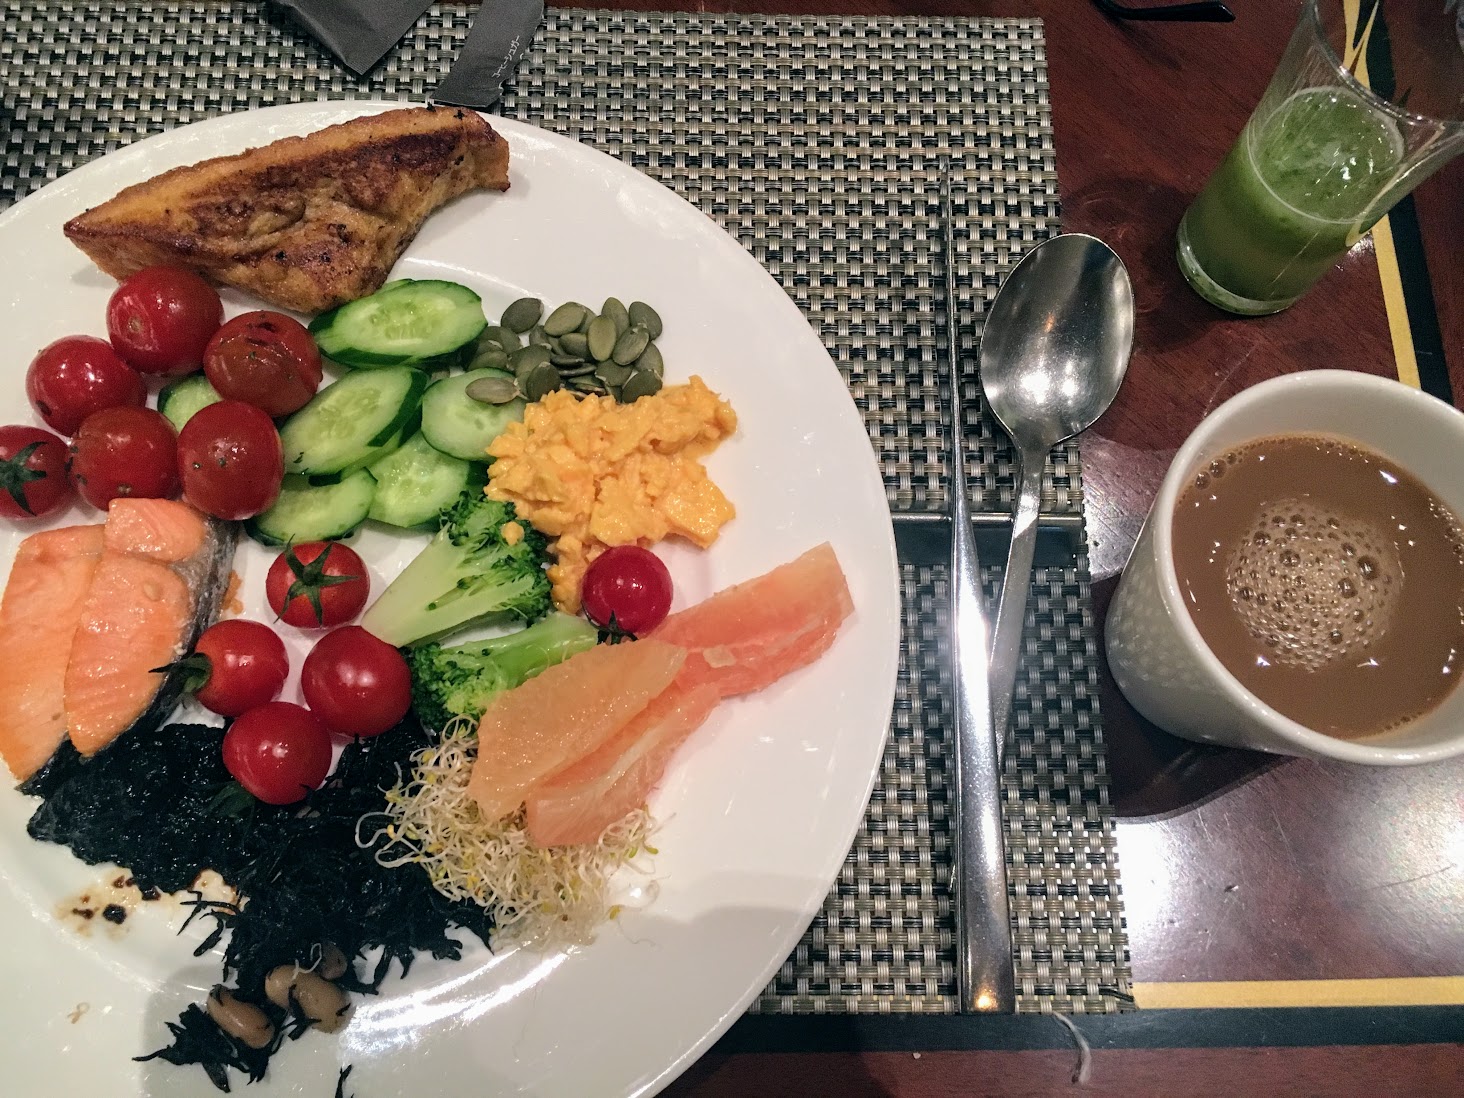 a plate of food and a cup of coffee